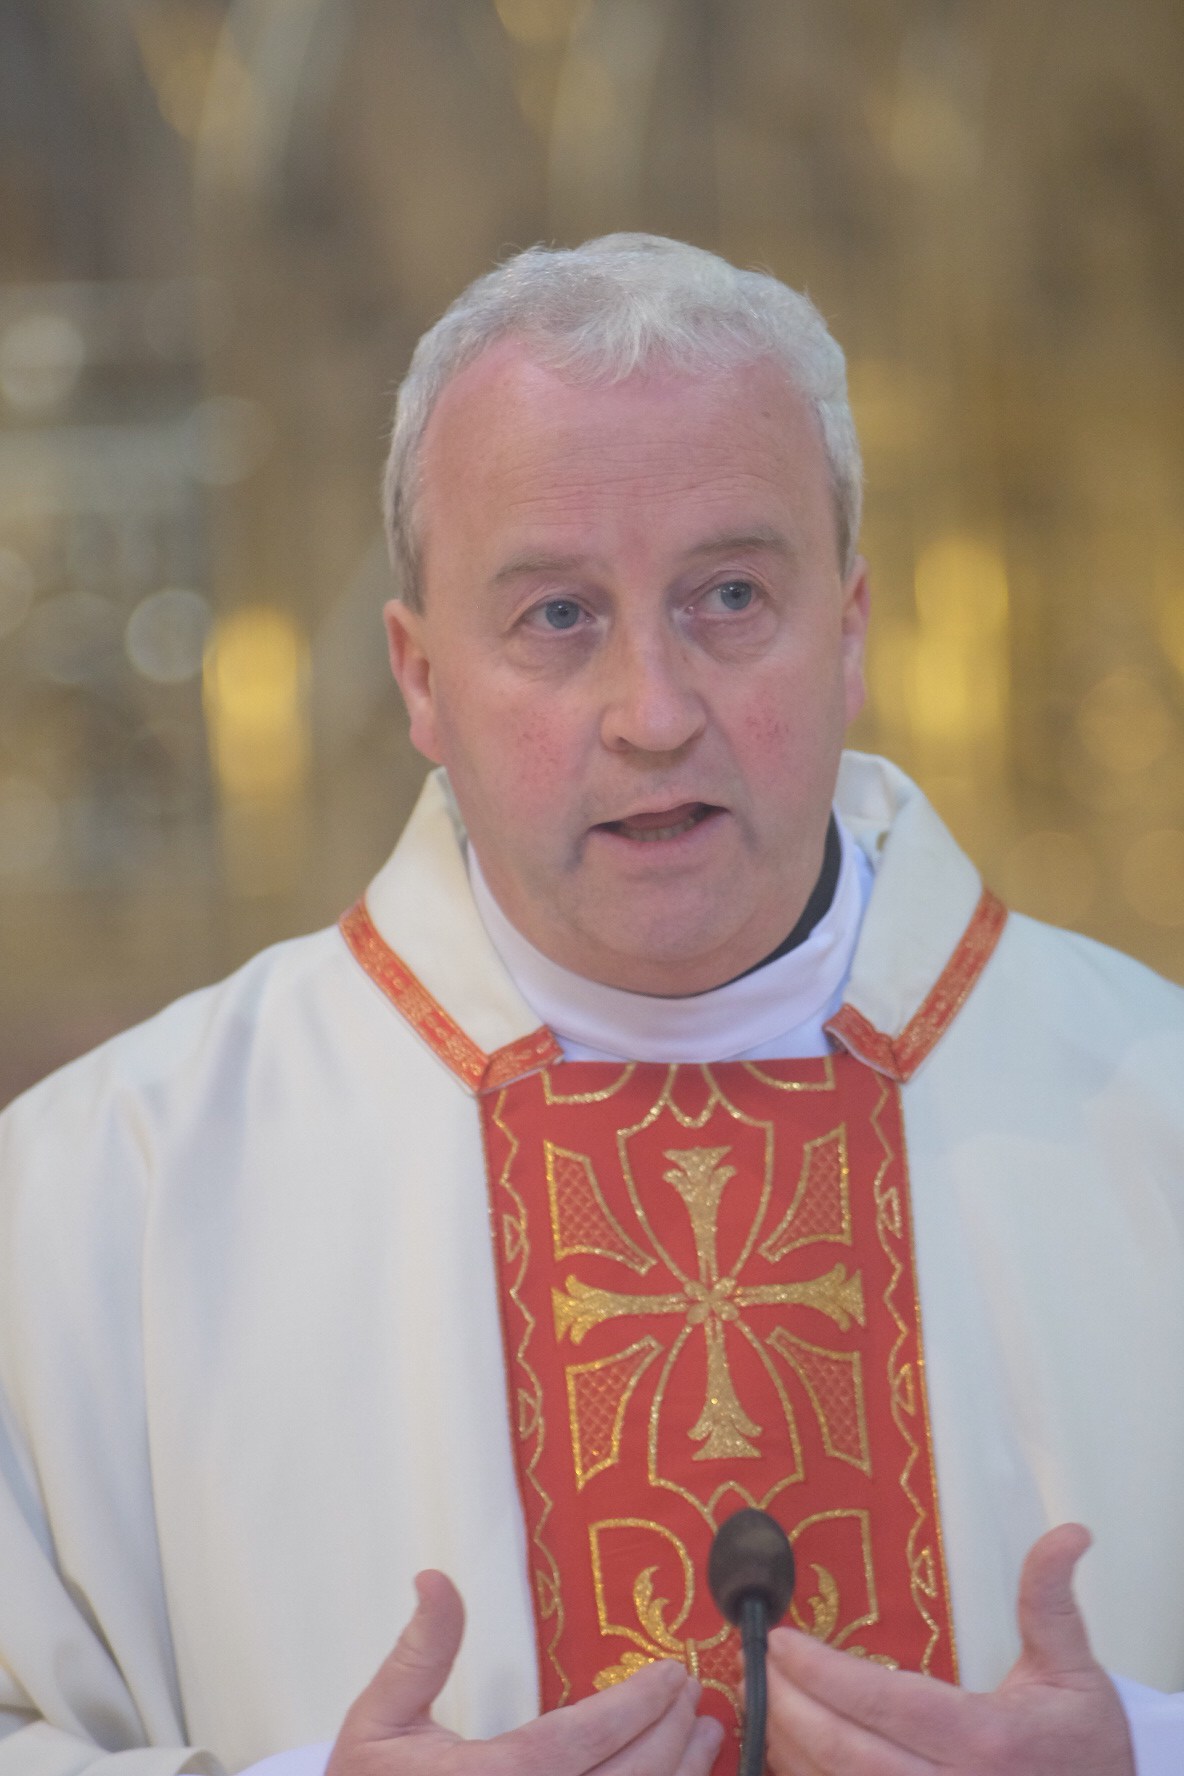 Ireland: Homily of Bishop Michael Router for ‘Day for Life’ Sunday